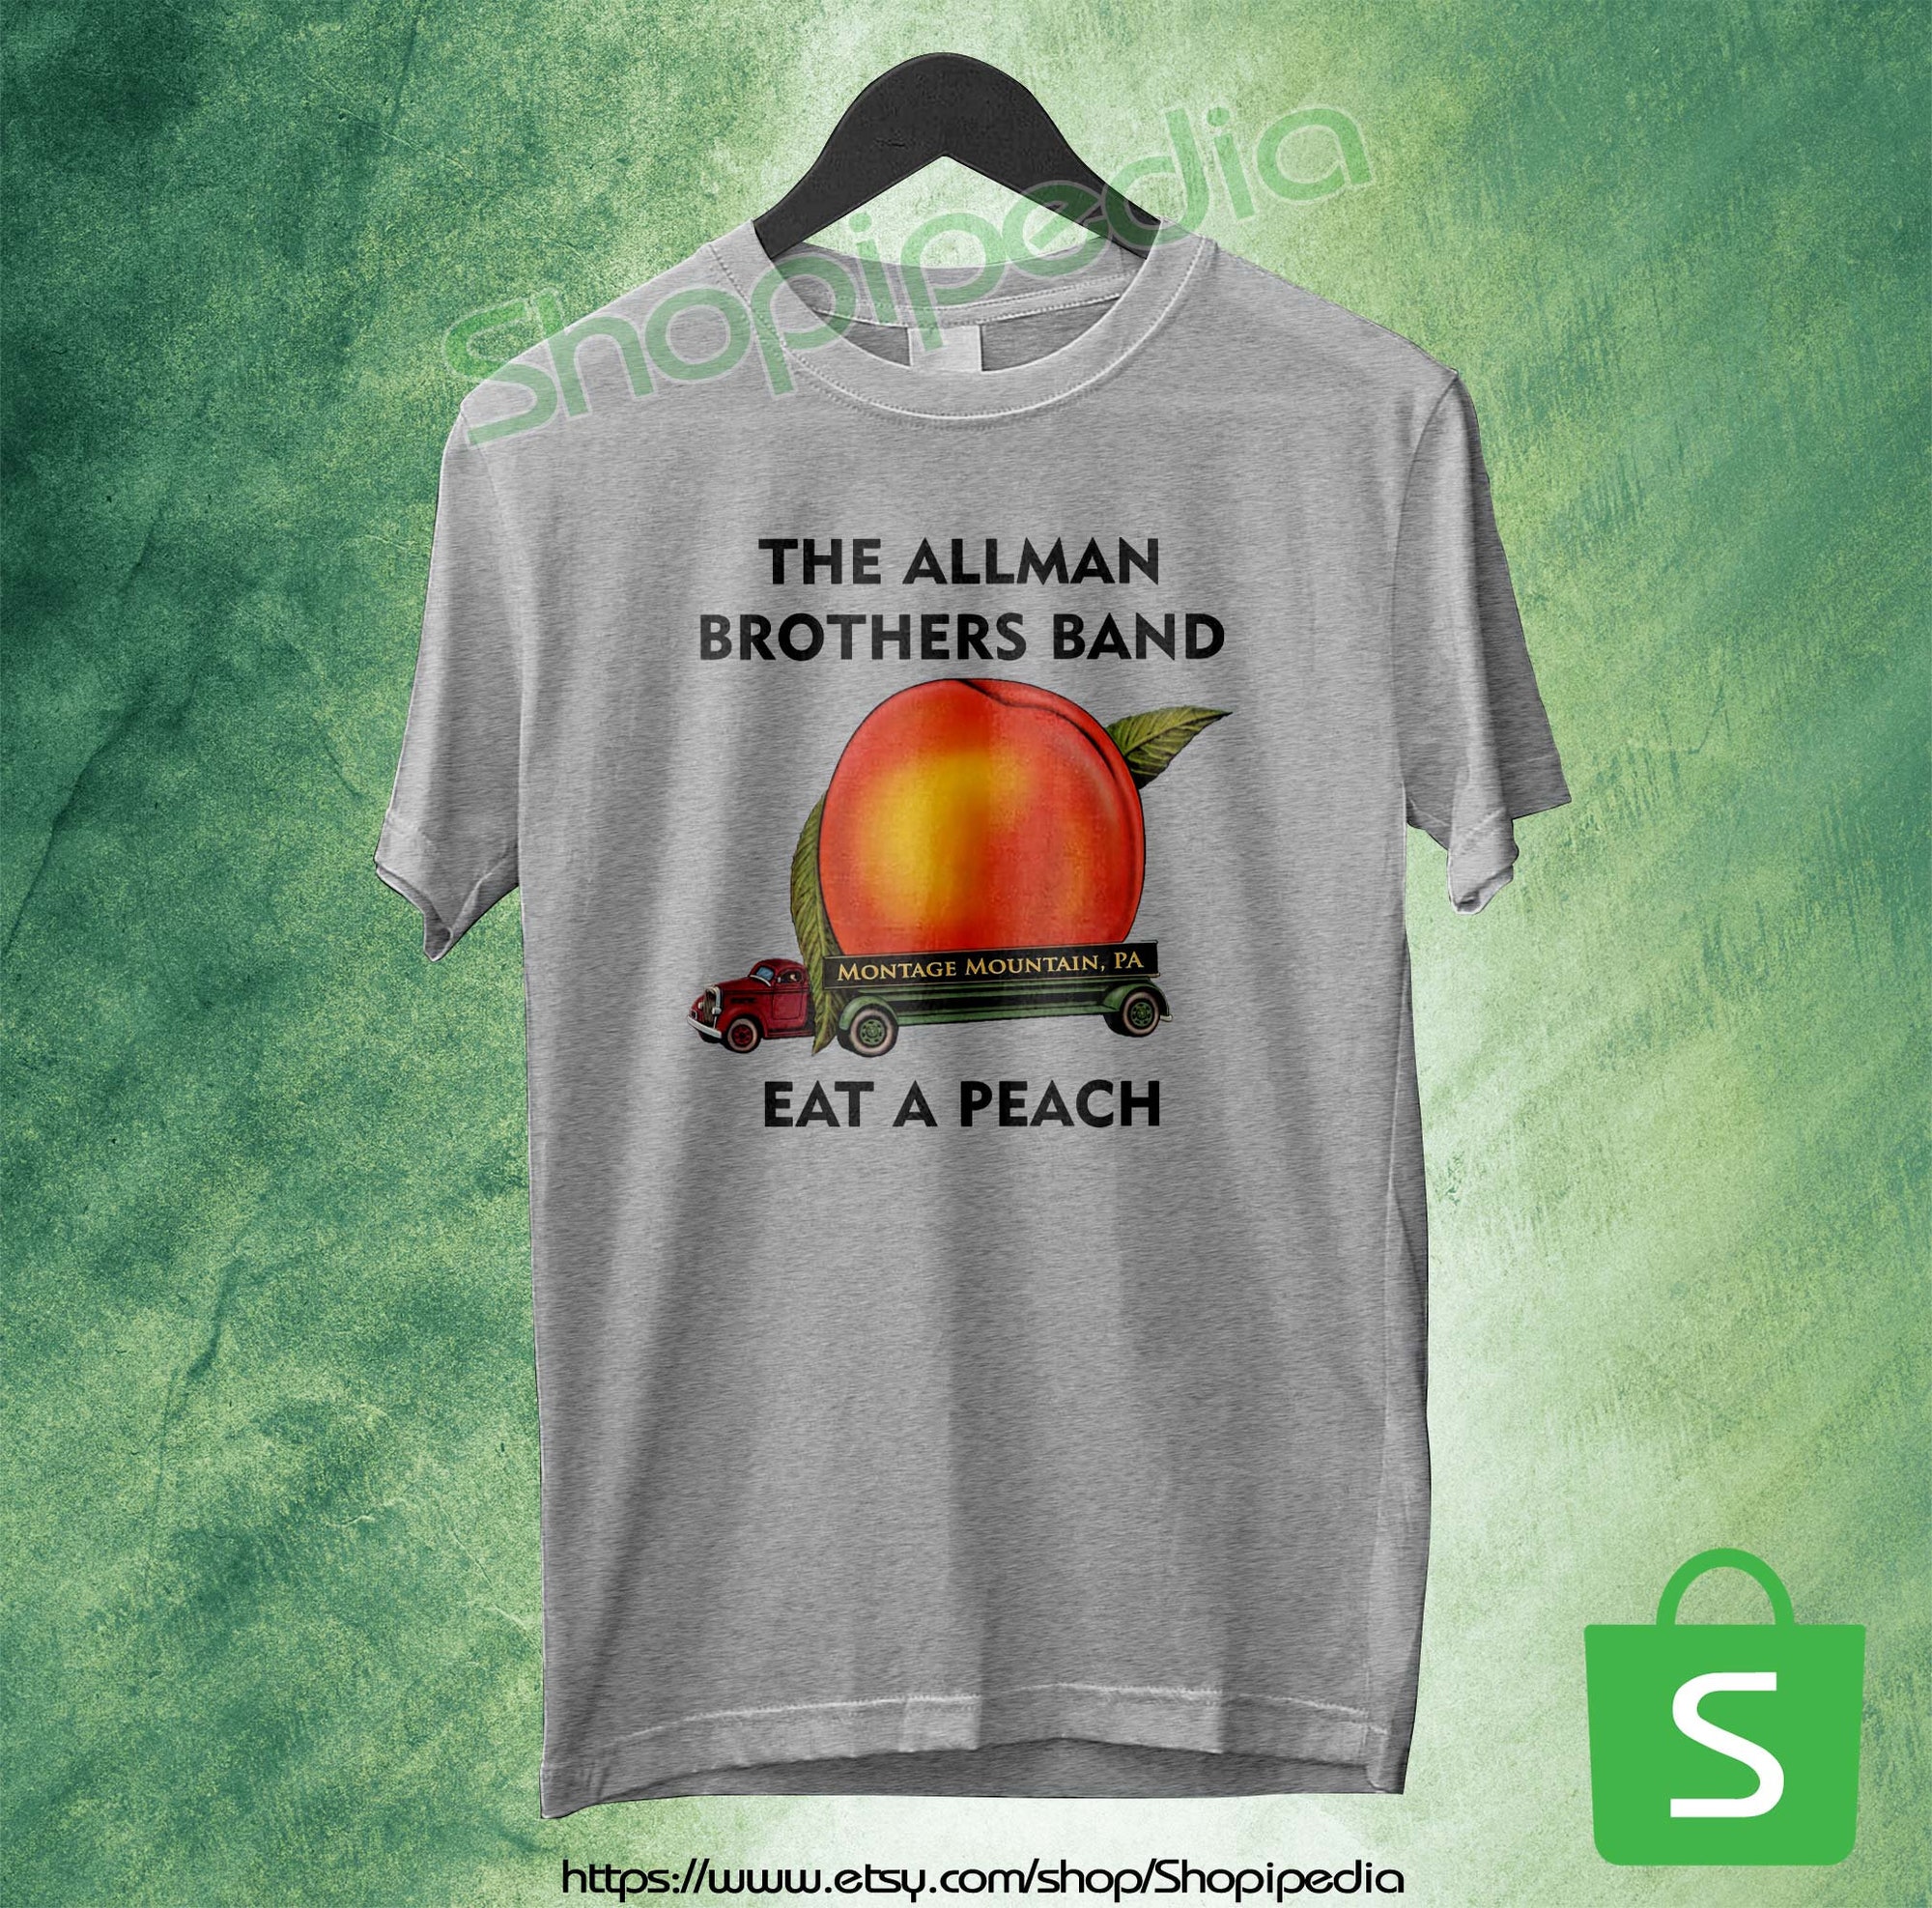 The Allman Brothers Band Eat a Peach Vintage T-shirt